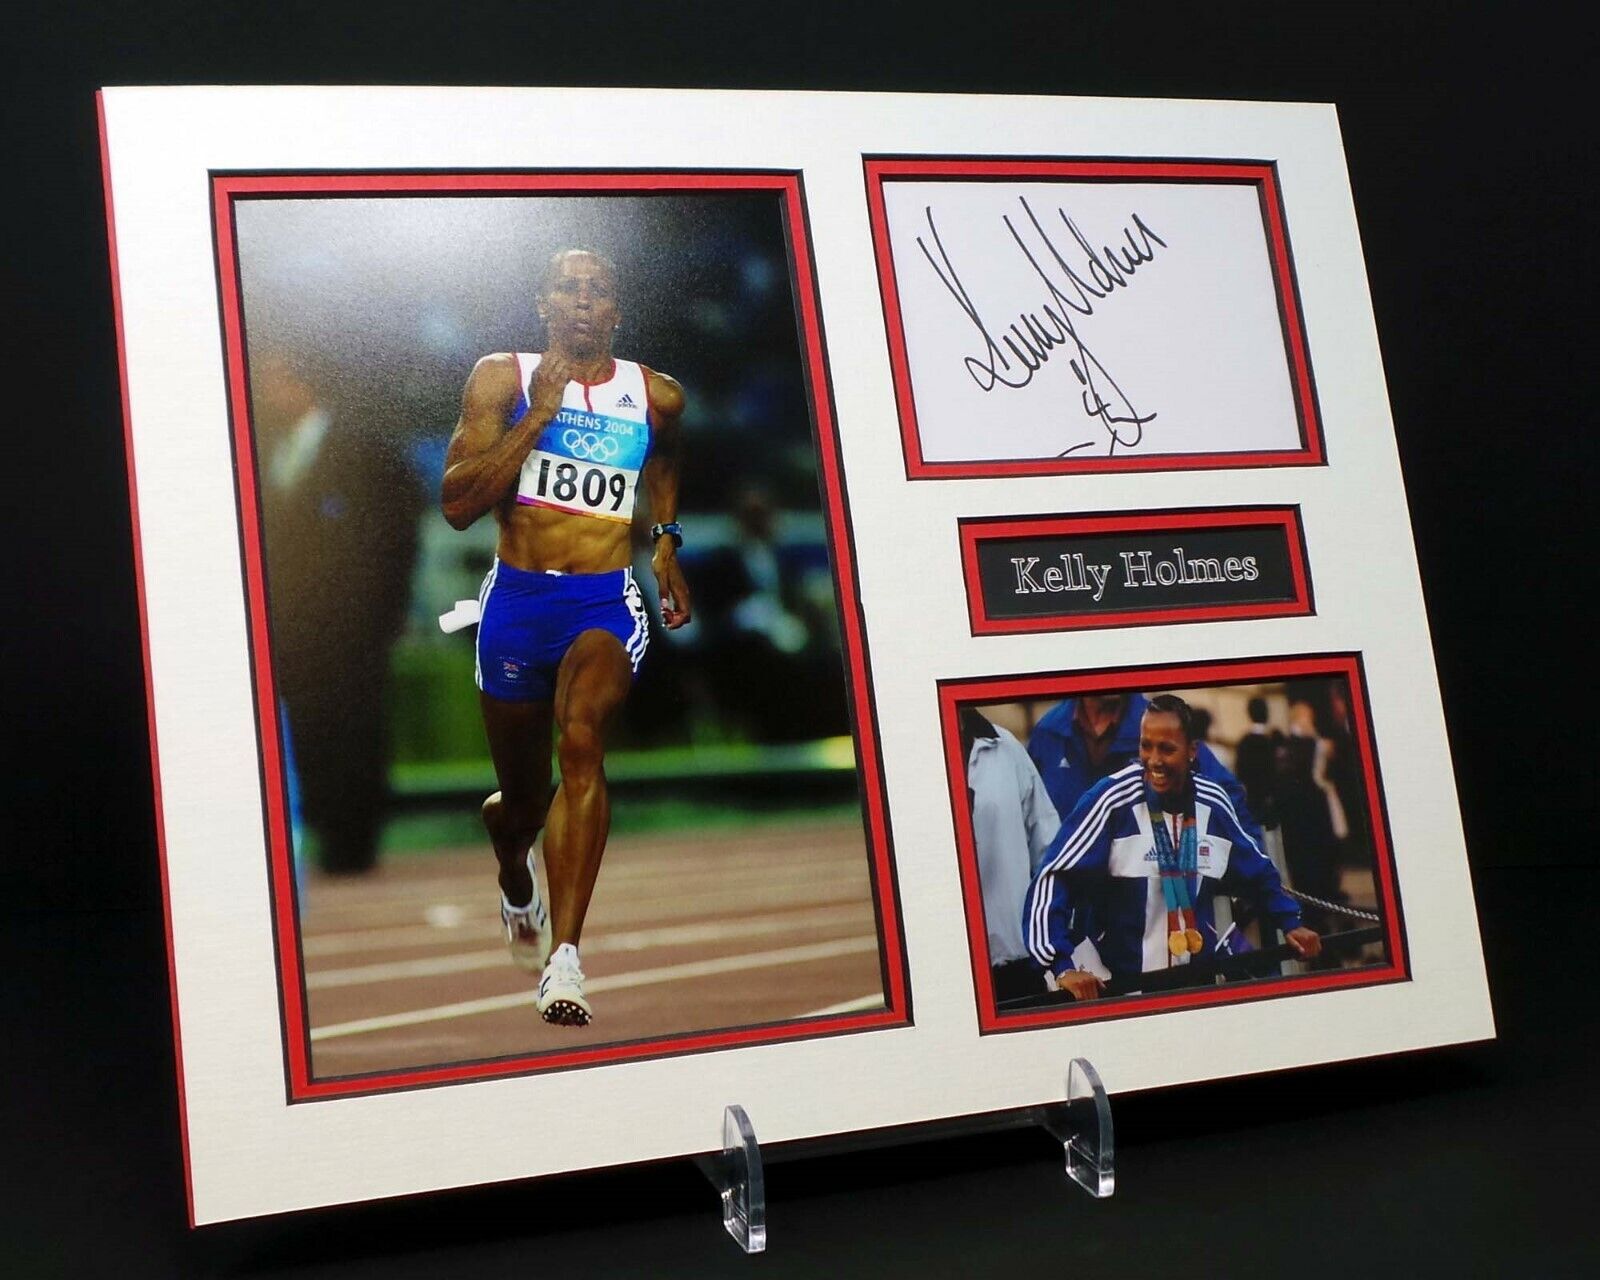 Kelly HOLMES Signed Mounted Photo Poster painting Display AFTAL Athlete, Gold Medal Winner.